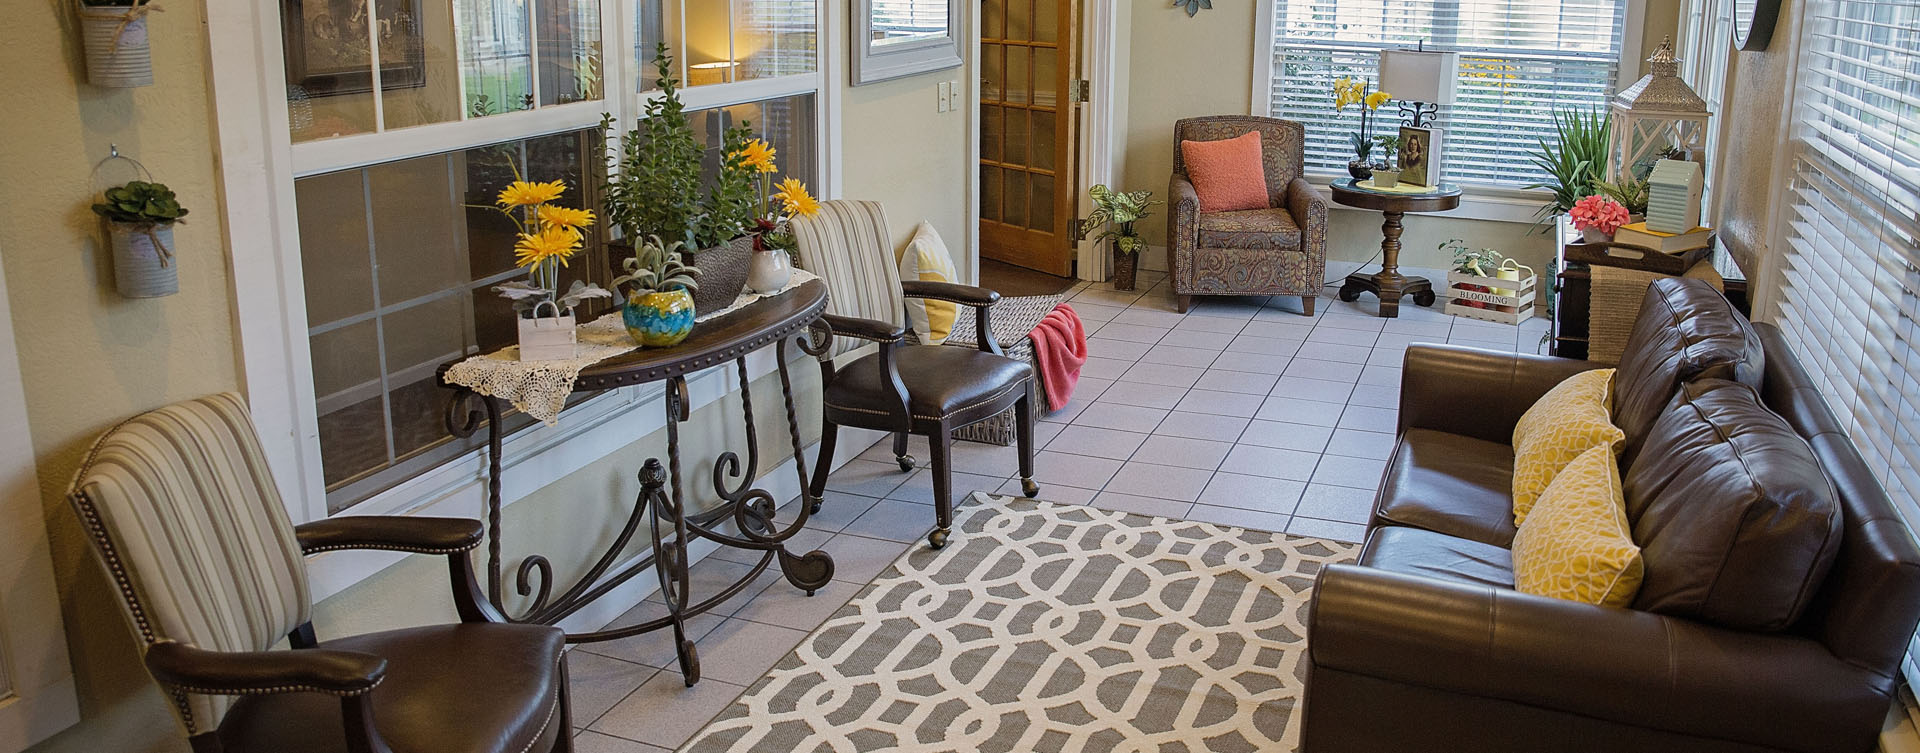 Enjoy the view of the outdoors from the sunroom at Bickford of Grand Island